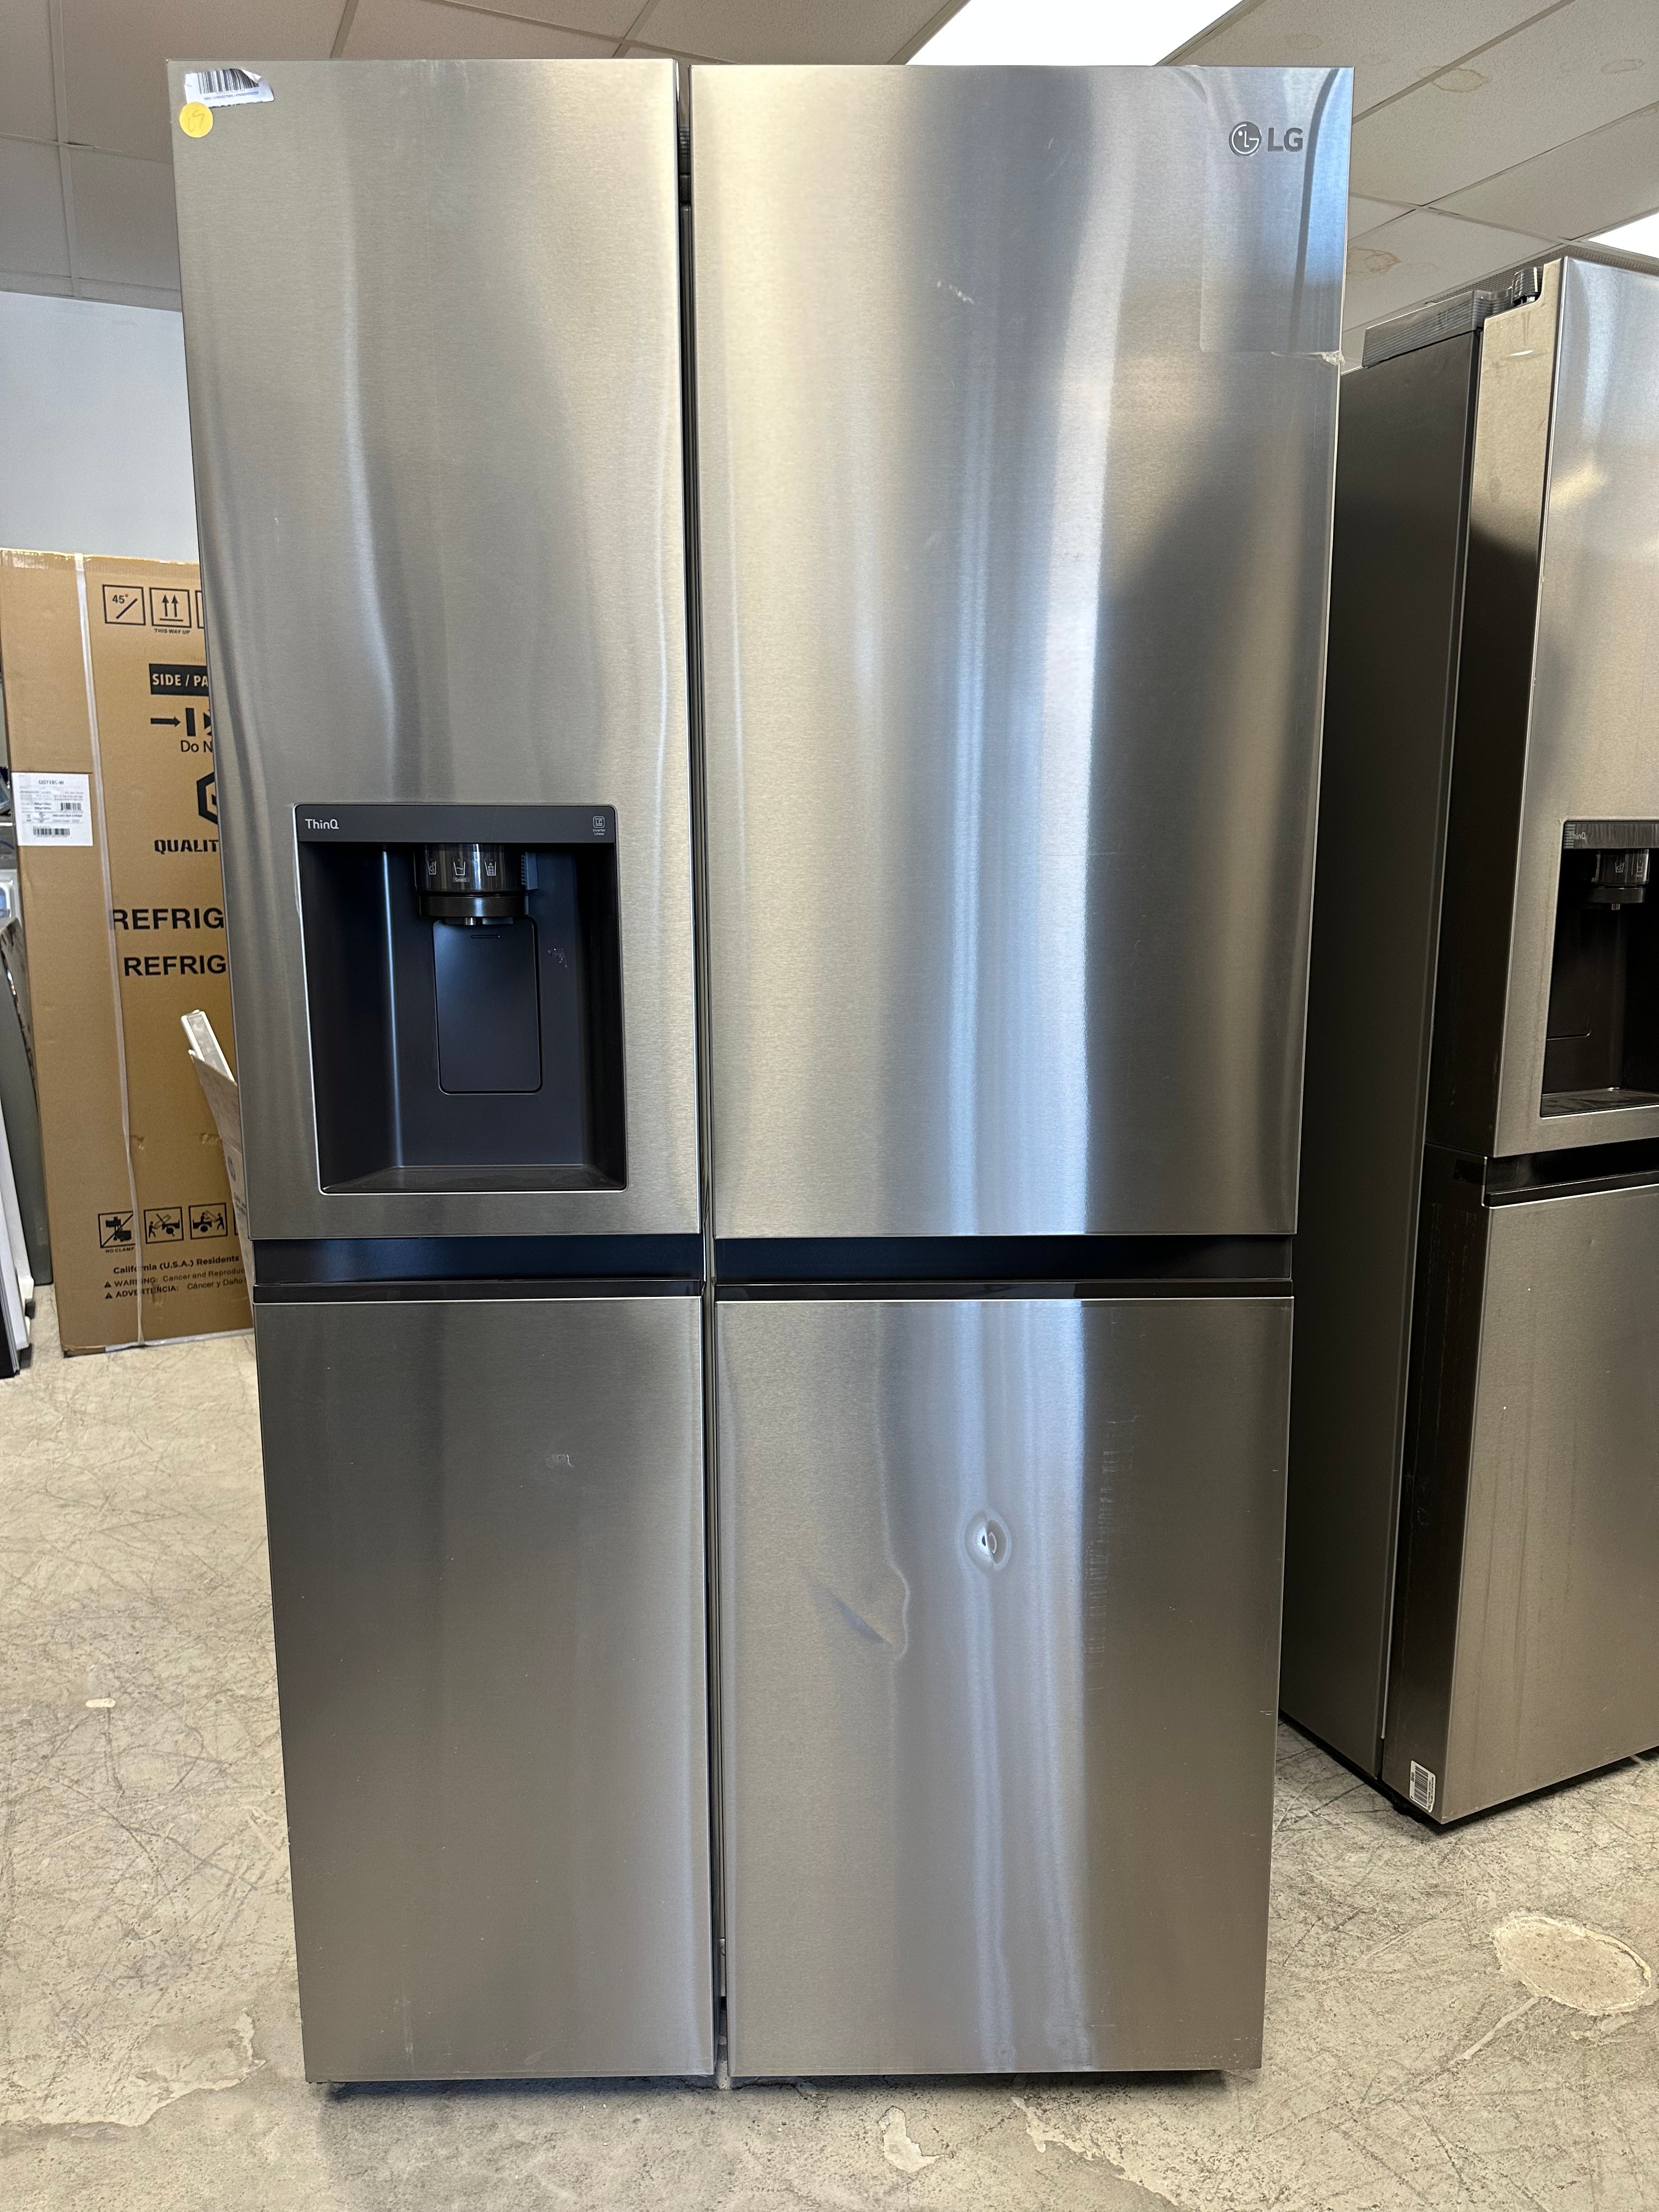 LG 27 cu. ft. Side-by-Side Refrigerator with Craft Ice